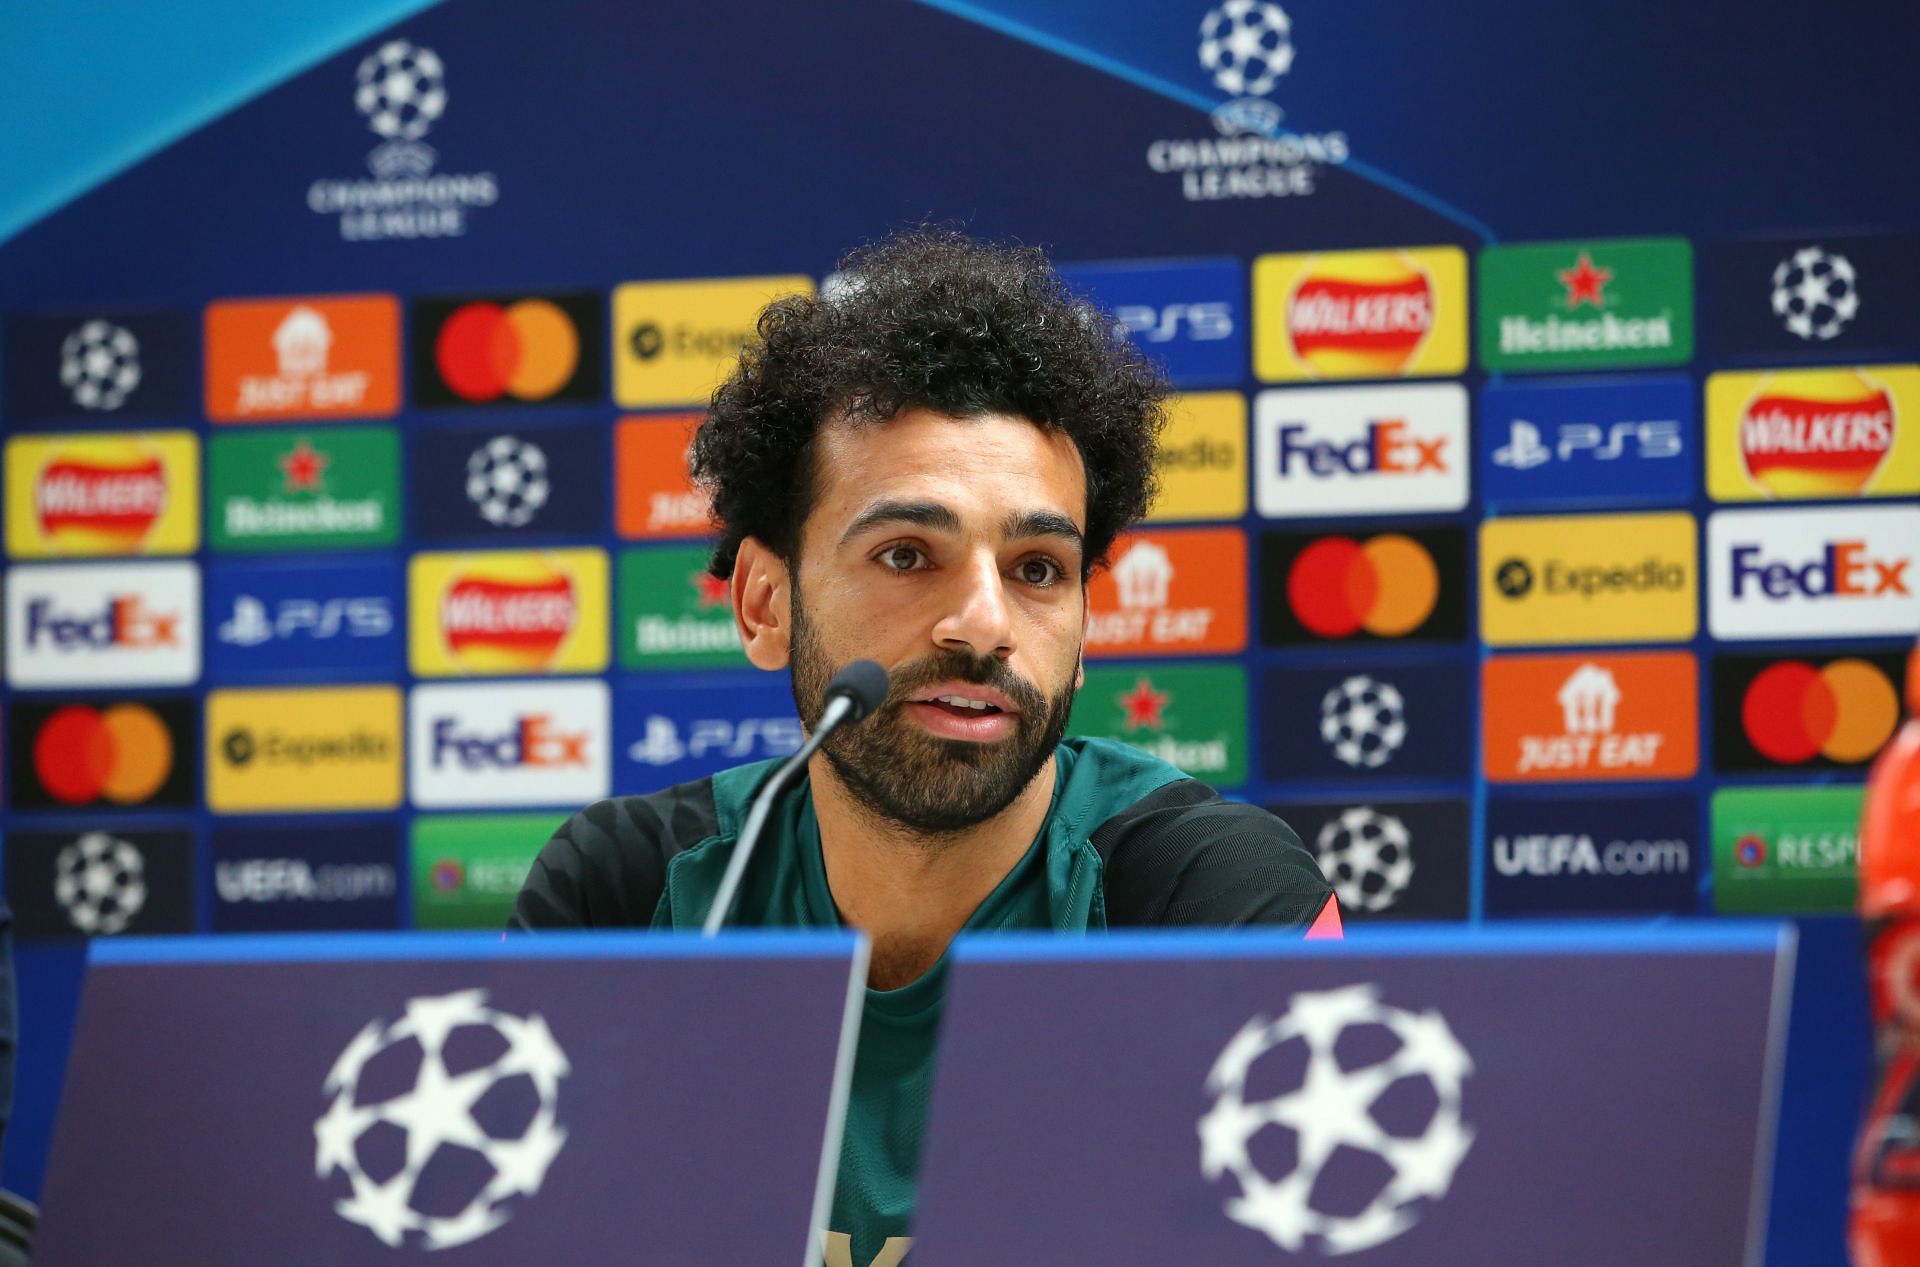 Salah will be out of contract at Liverpool in 2023